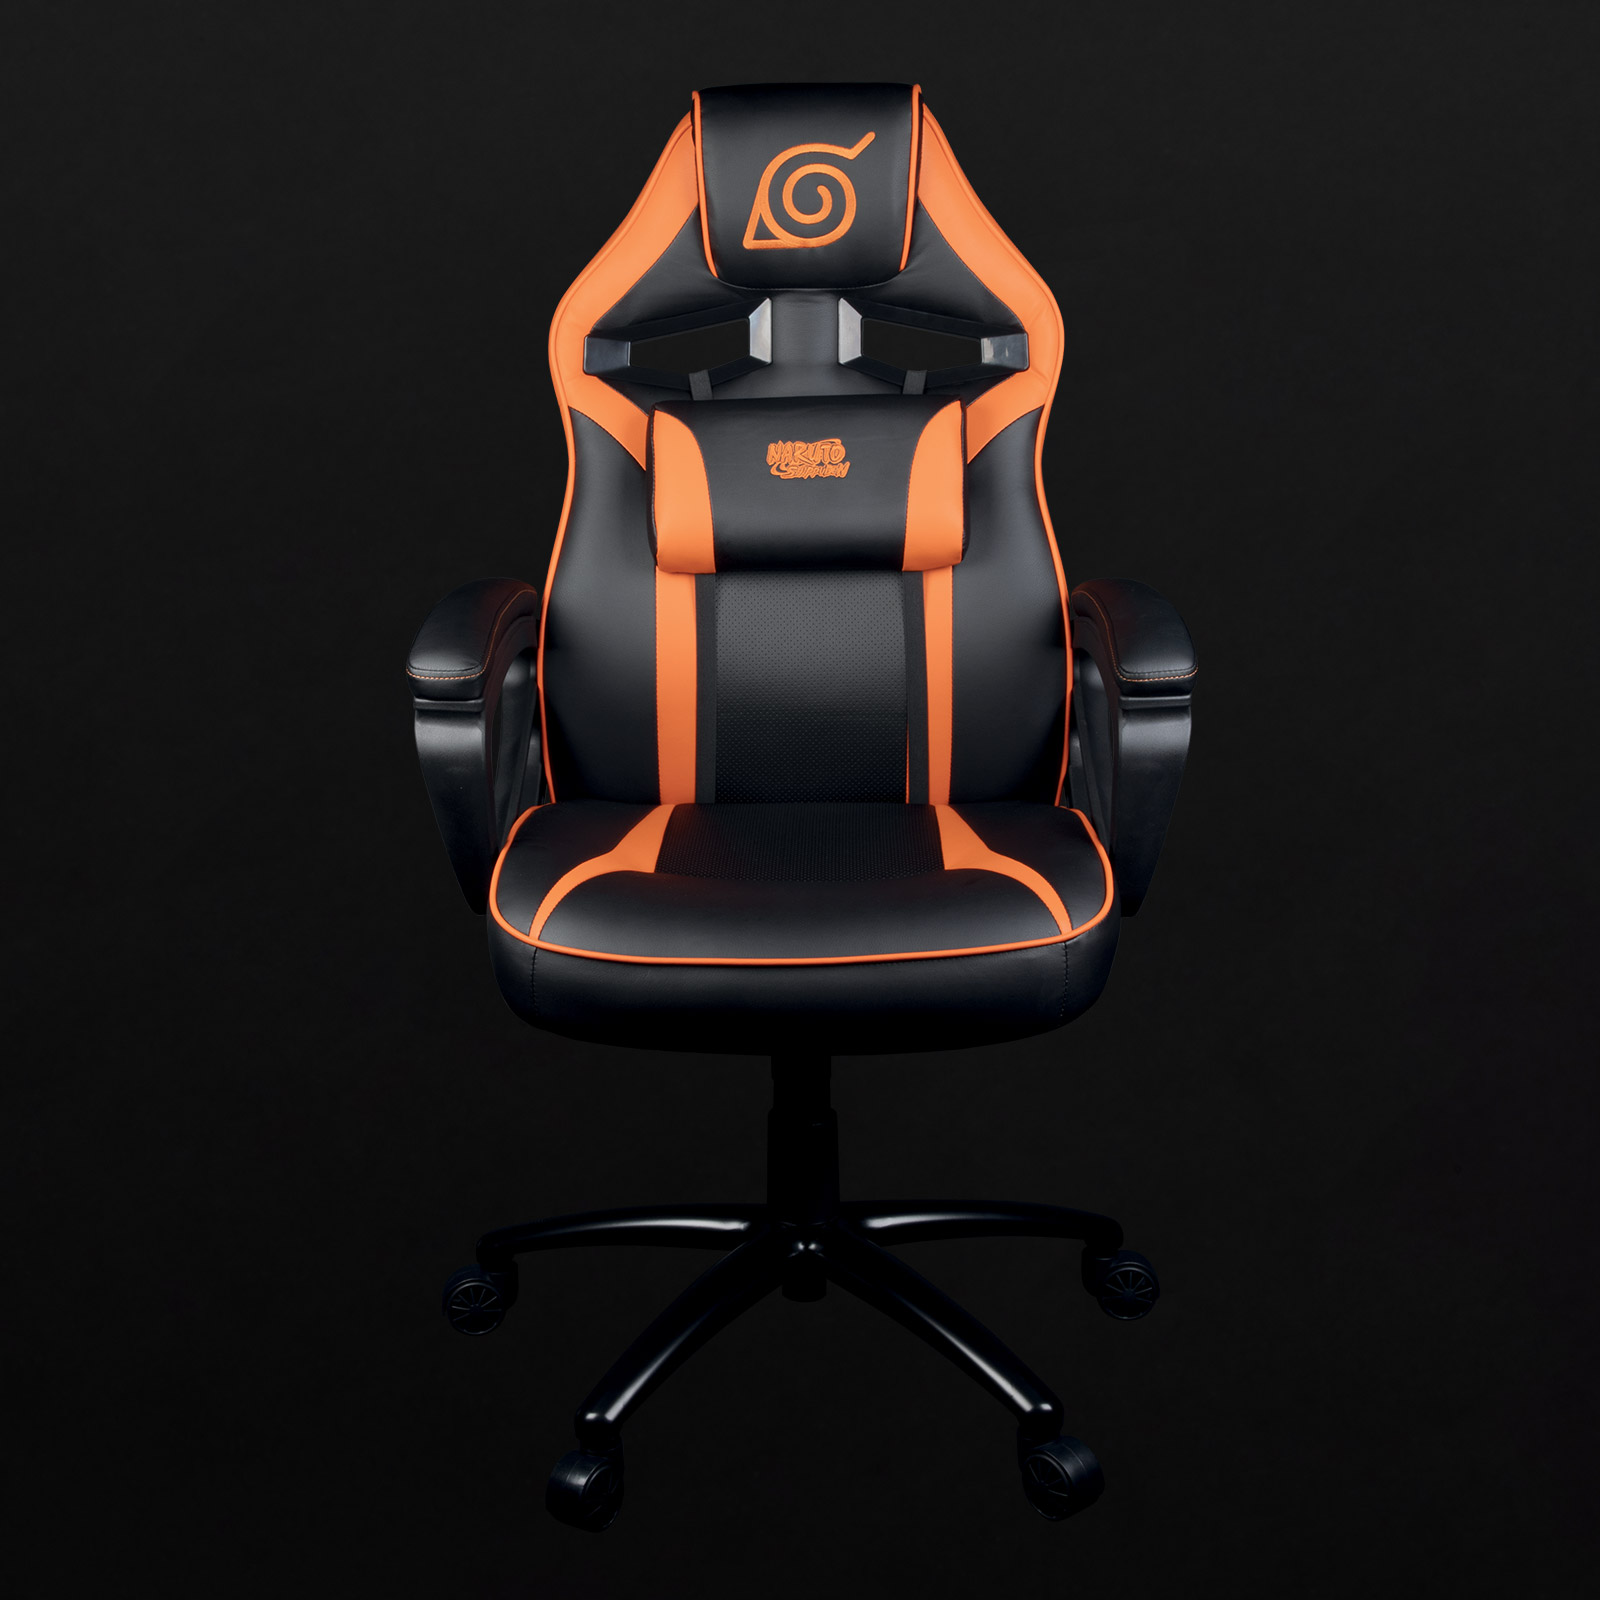 Secretlab's Naruto Shippuden gaming chairs are perfect for would